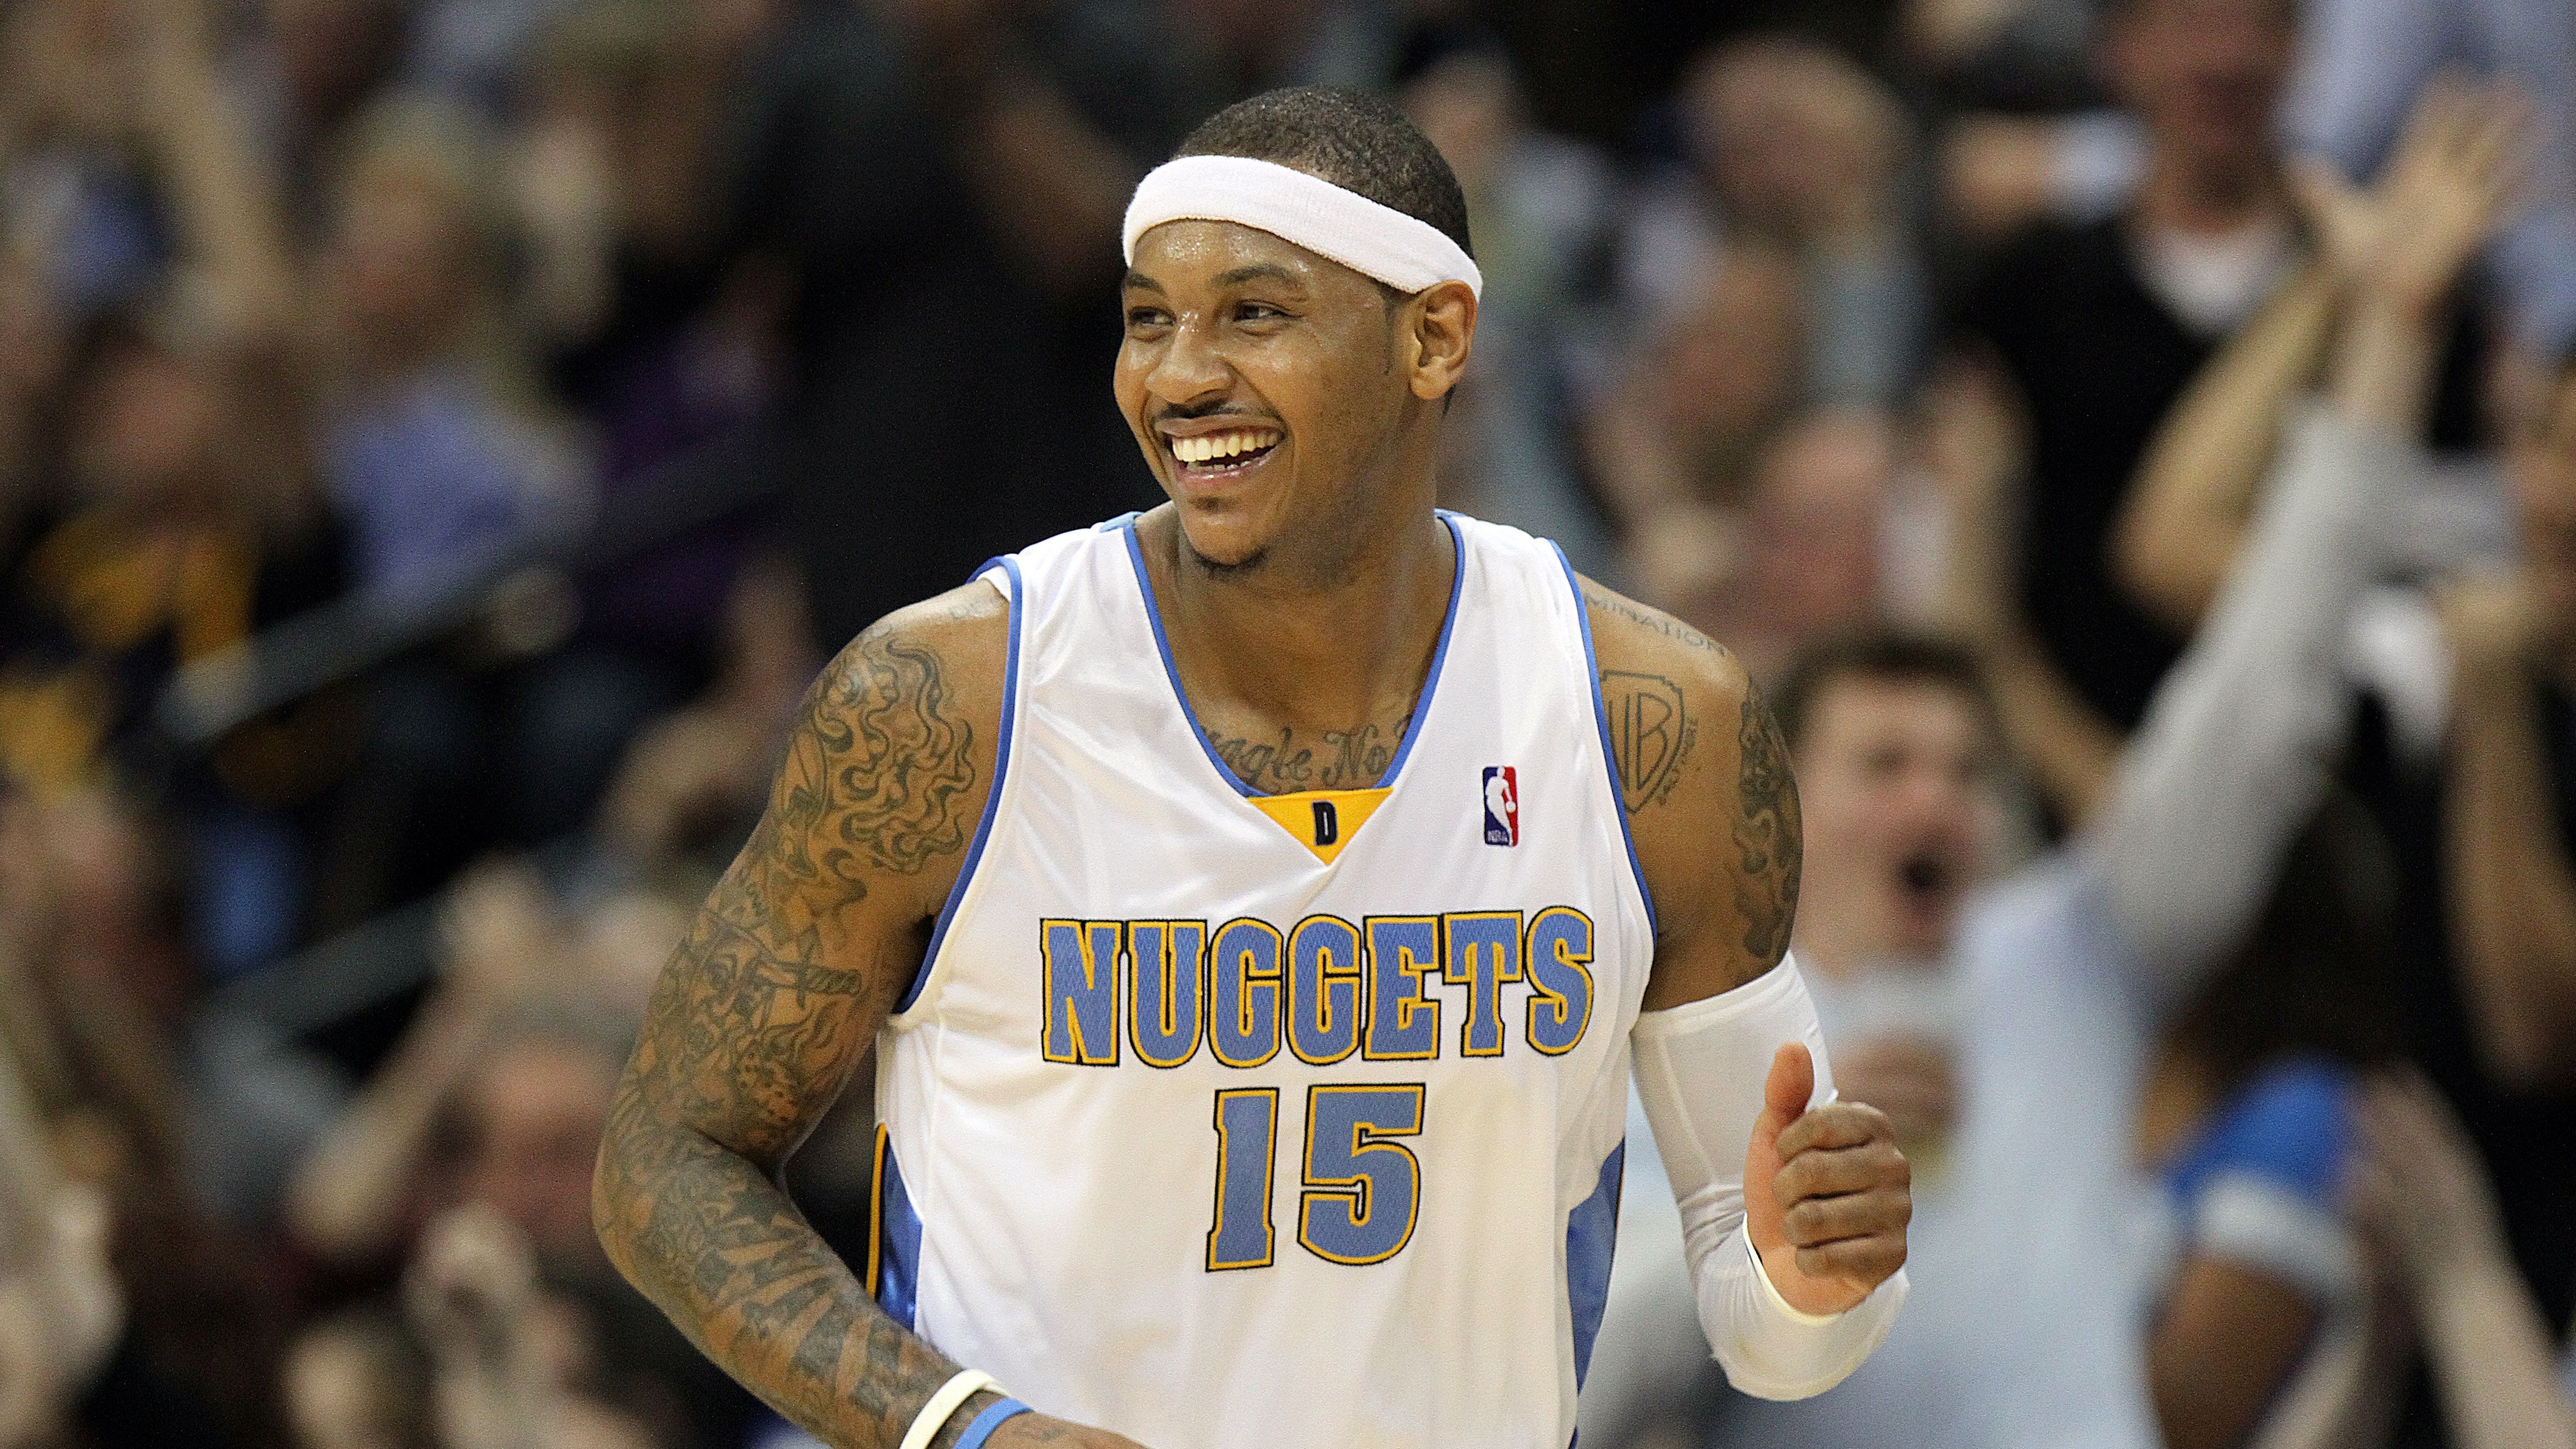 <strong>Platz 10: Carmelo Anthony</strong><br>- Punkte: 28.289 (⌀ 22,5 Punkte pro Spiel)<br>- Spiele: 1.260<br>- In der NBA von: 2003-2022<br>- Teams: Denver Nuggets, New York Knicks, Oklahoma City Thunder, Houston Rockets, Portland Trail Blazers, Los Angeles Lakers